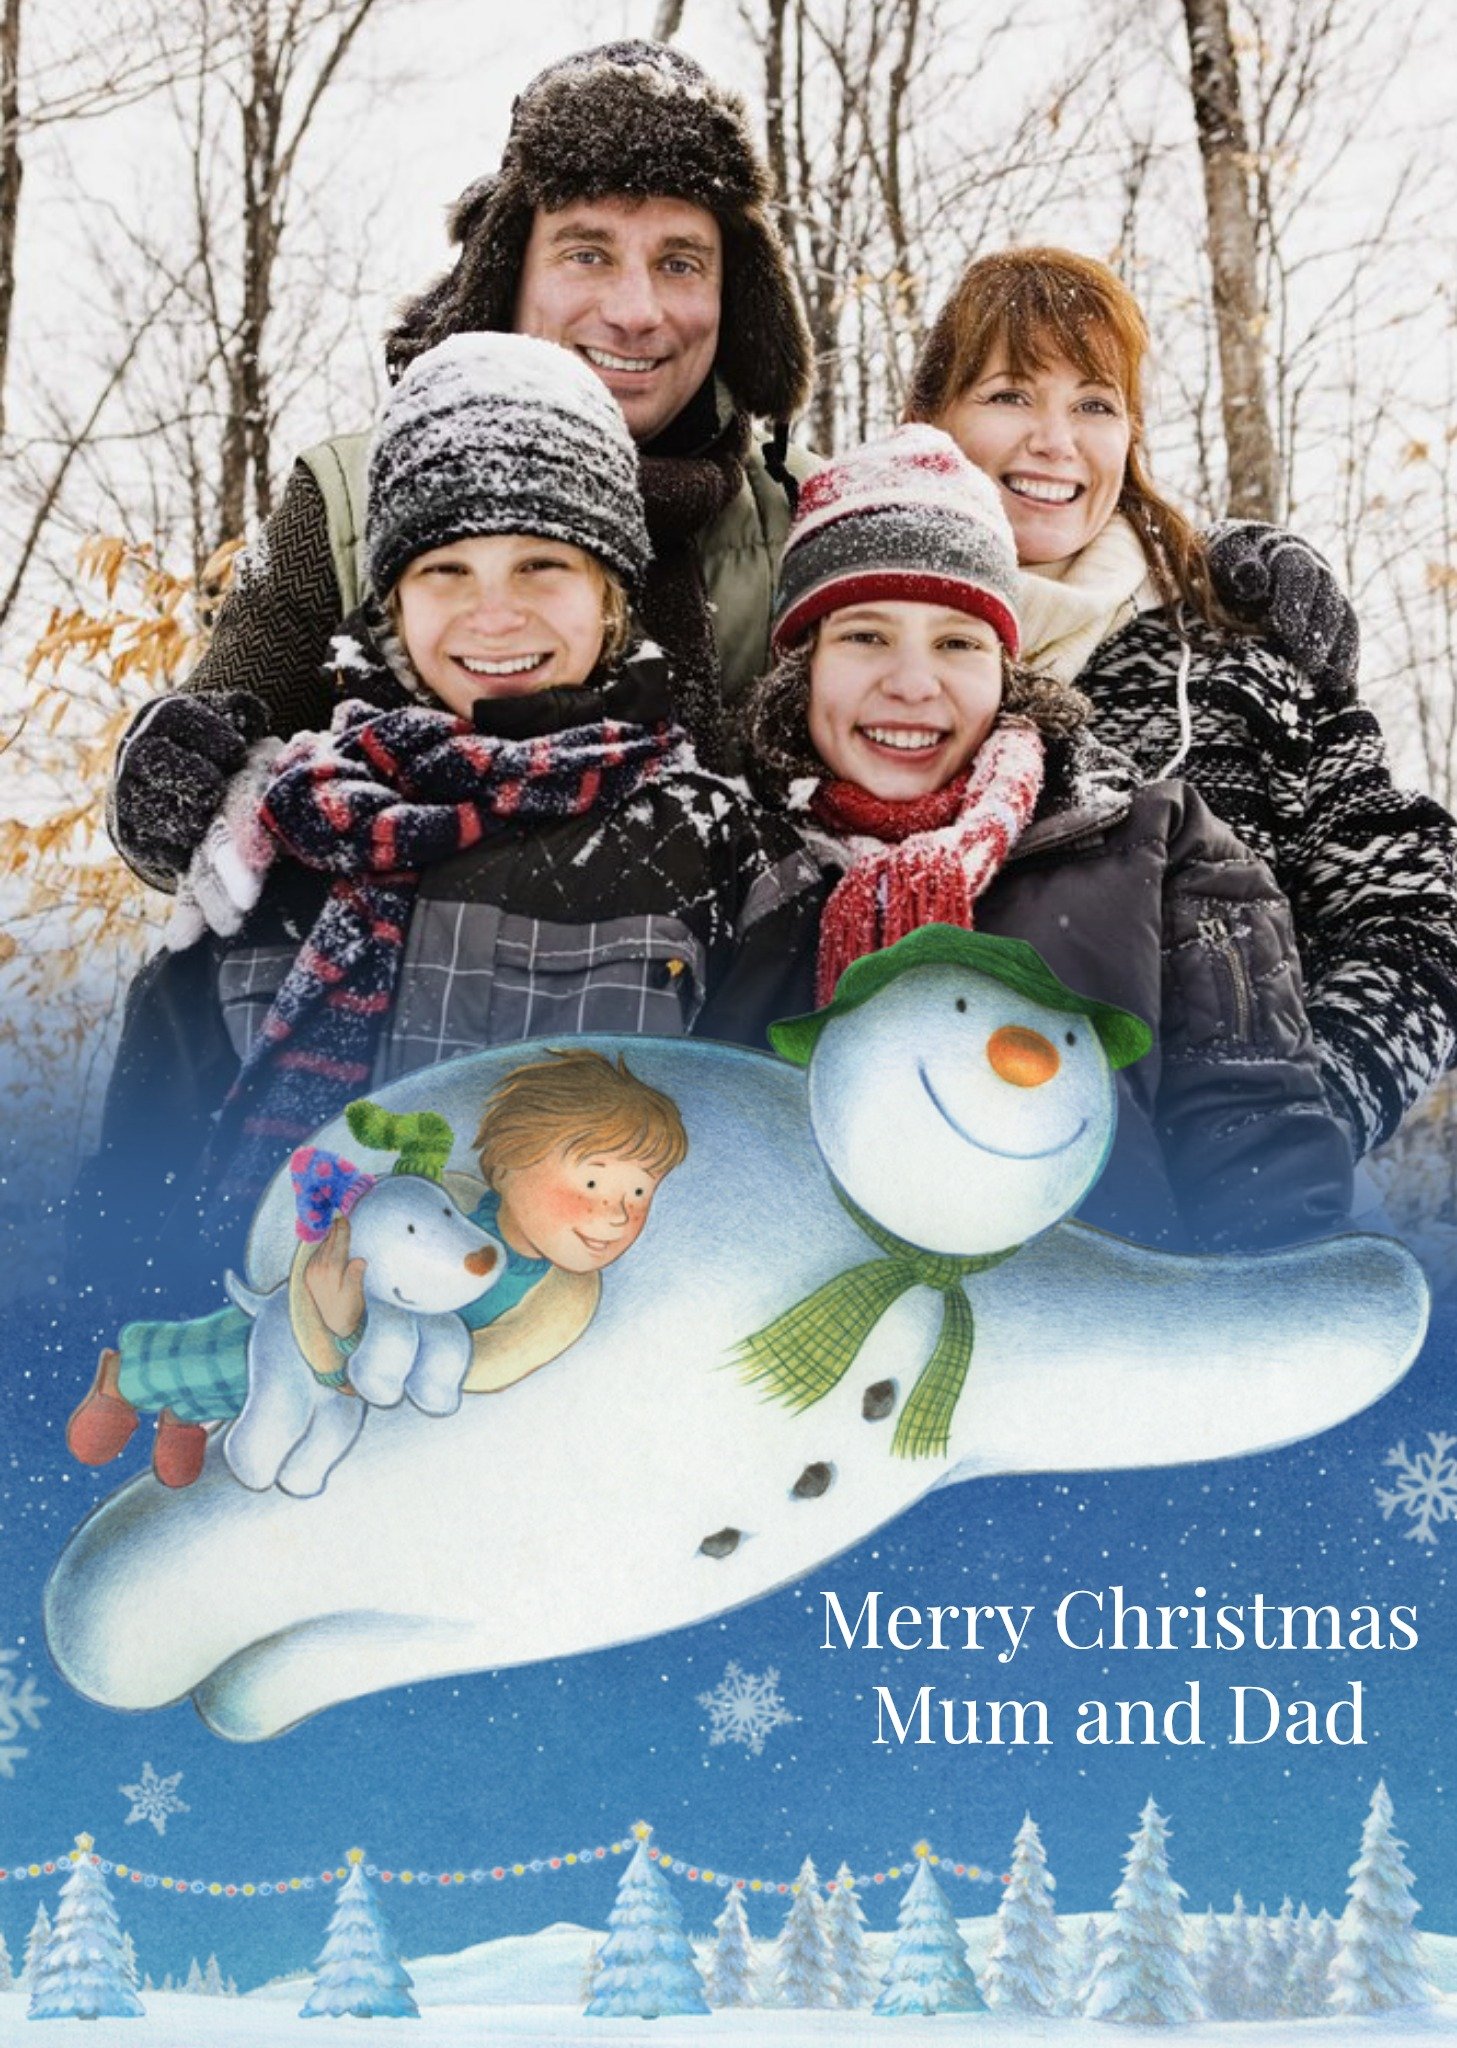 The Snowman Merry Christmas Mum And Dad Photo Card Ecard